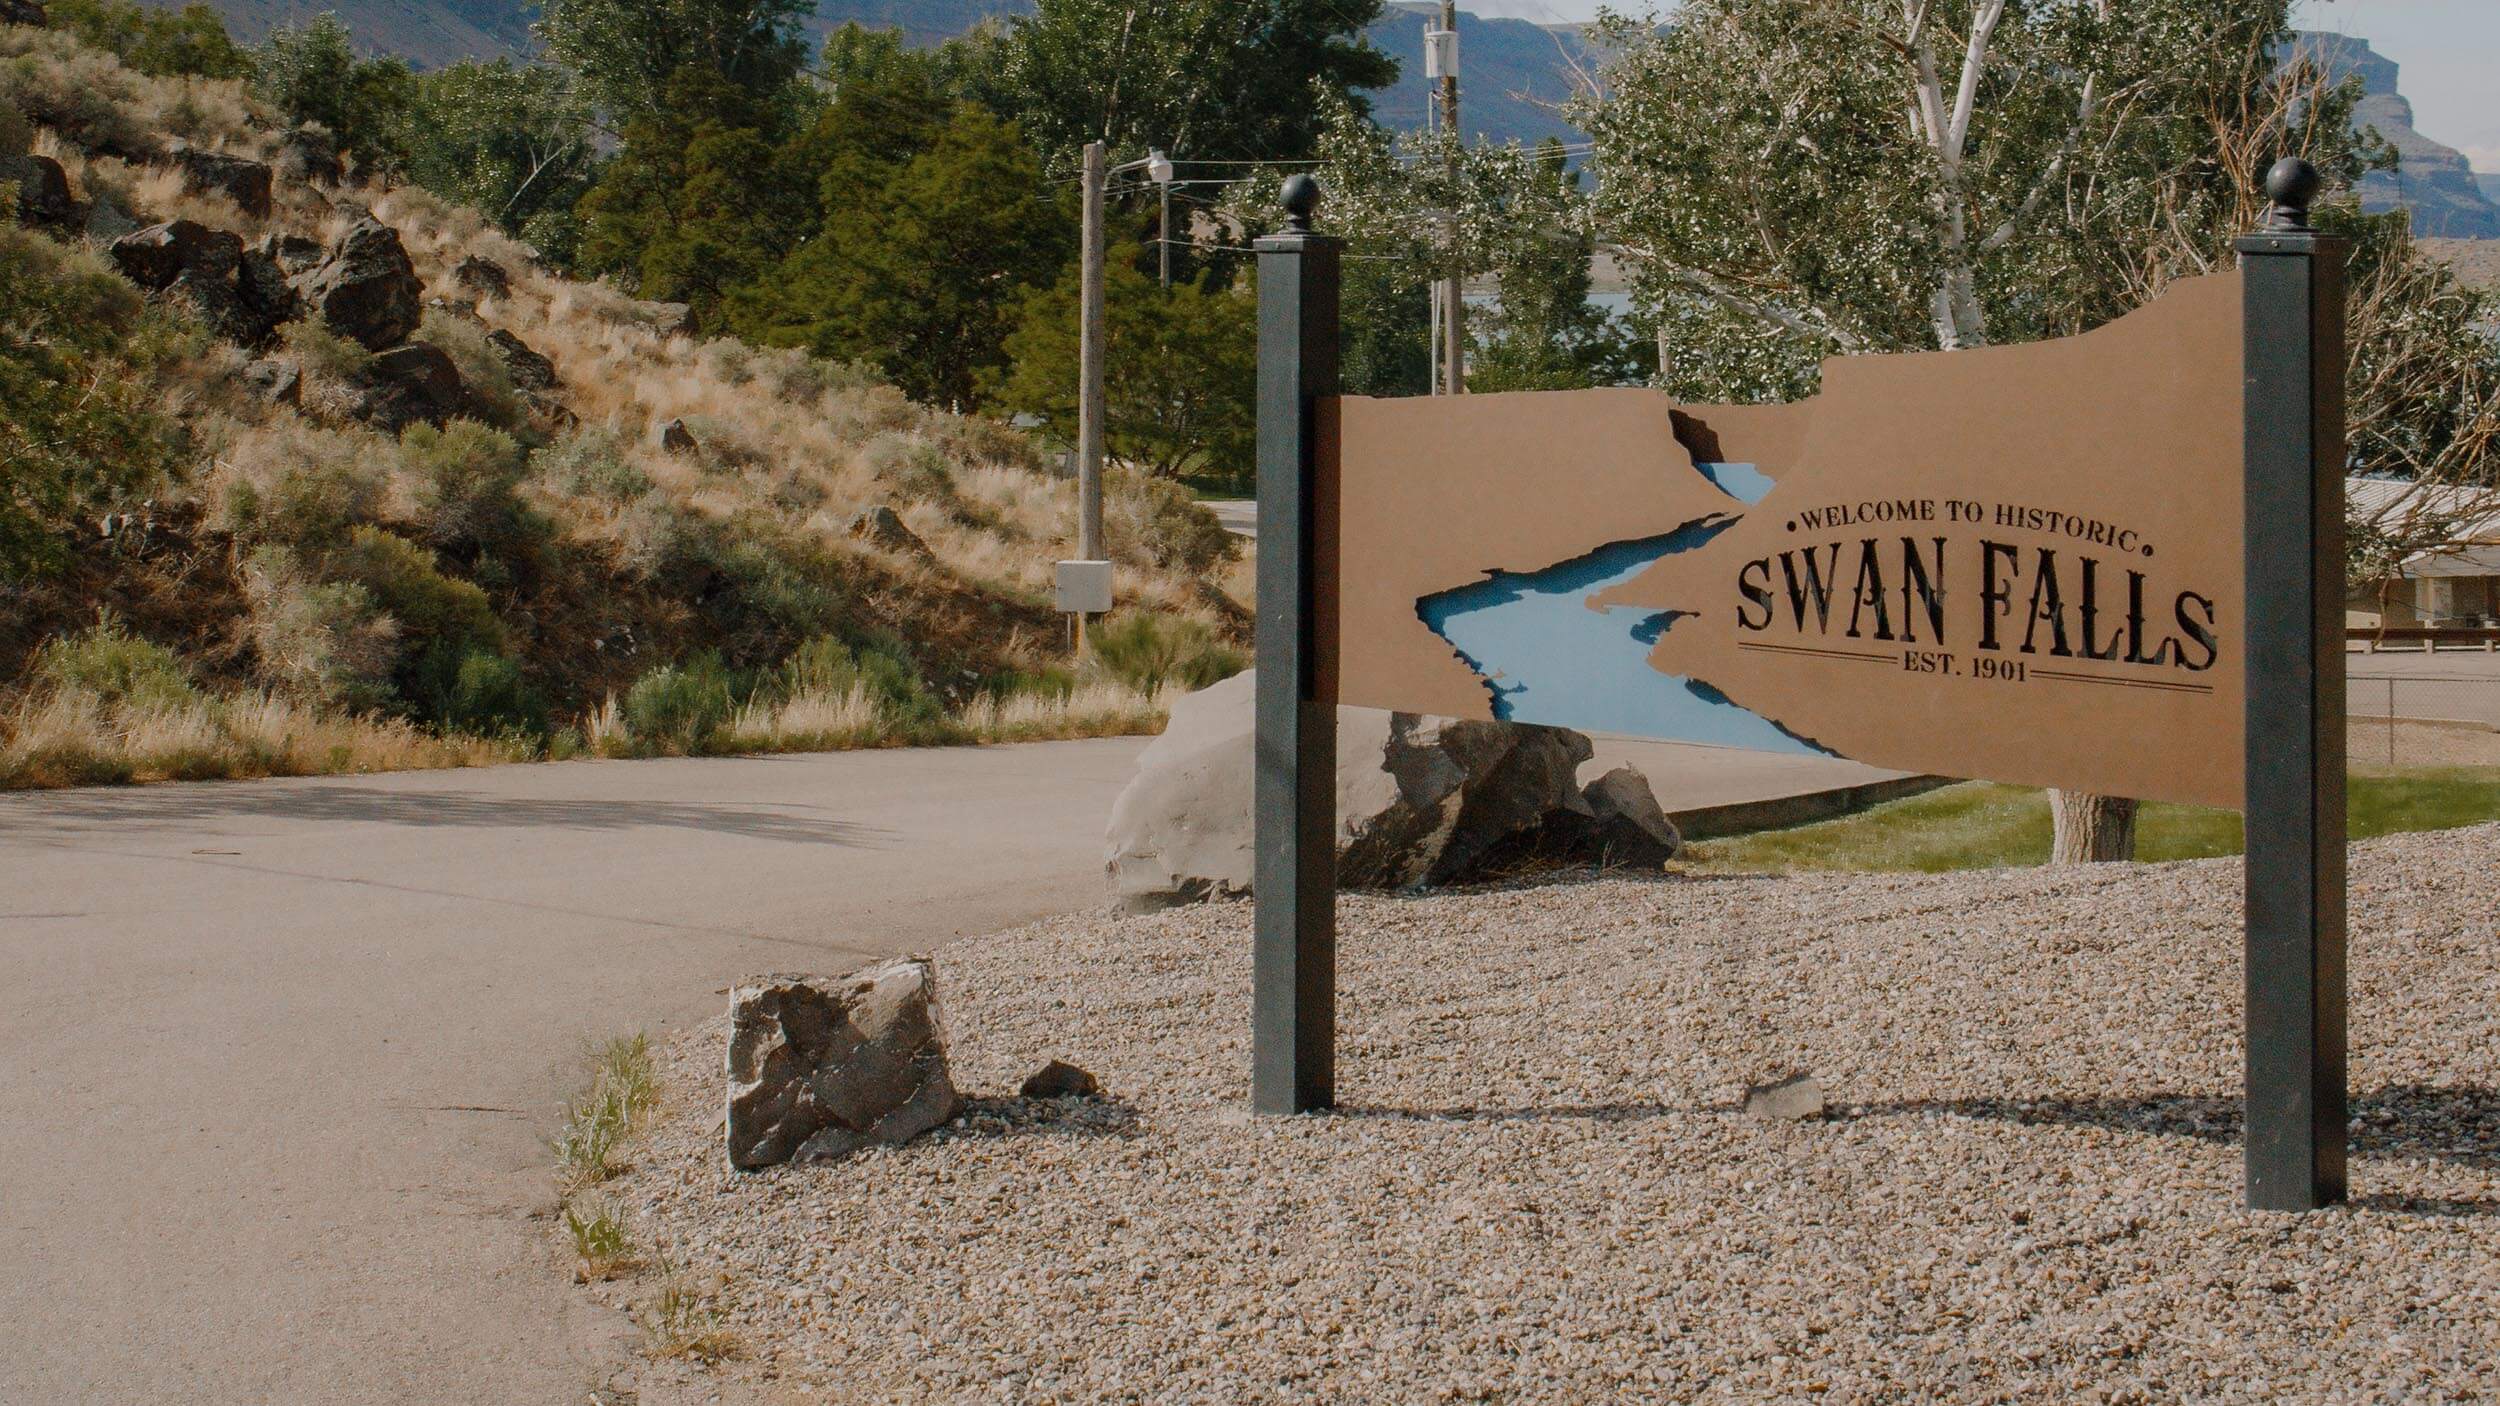 a sign for swan falls on the side of a road with trees in the background